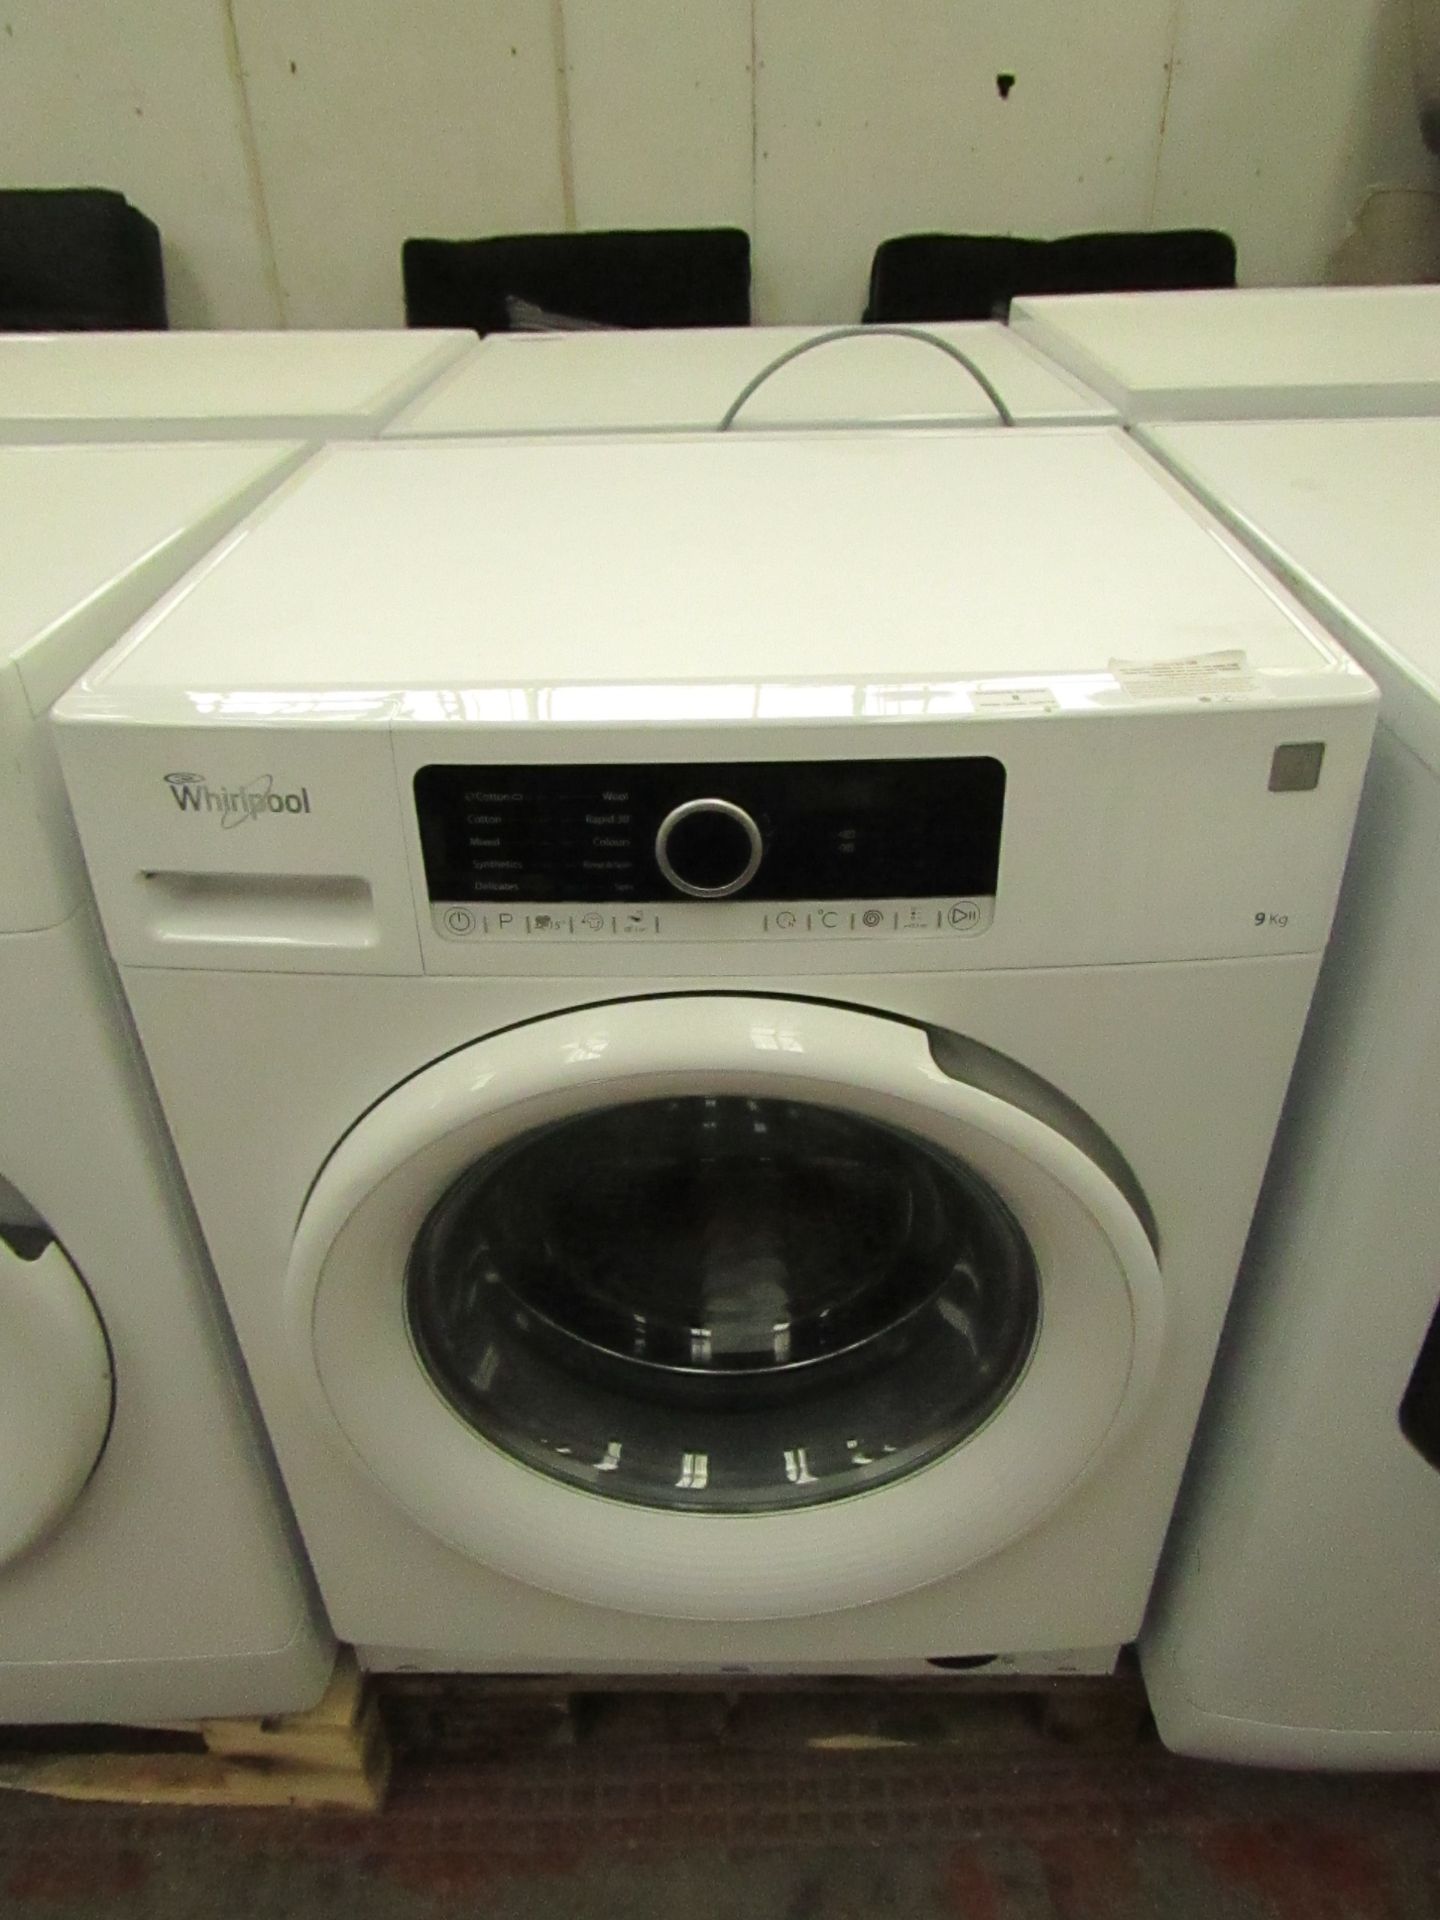 Whirlpool 9kg 1400rpm washing machine. Powers on & spins.